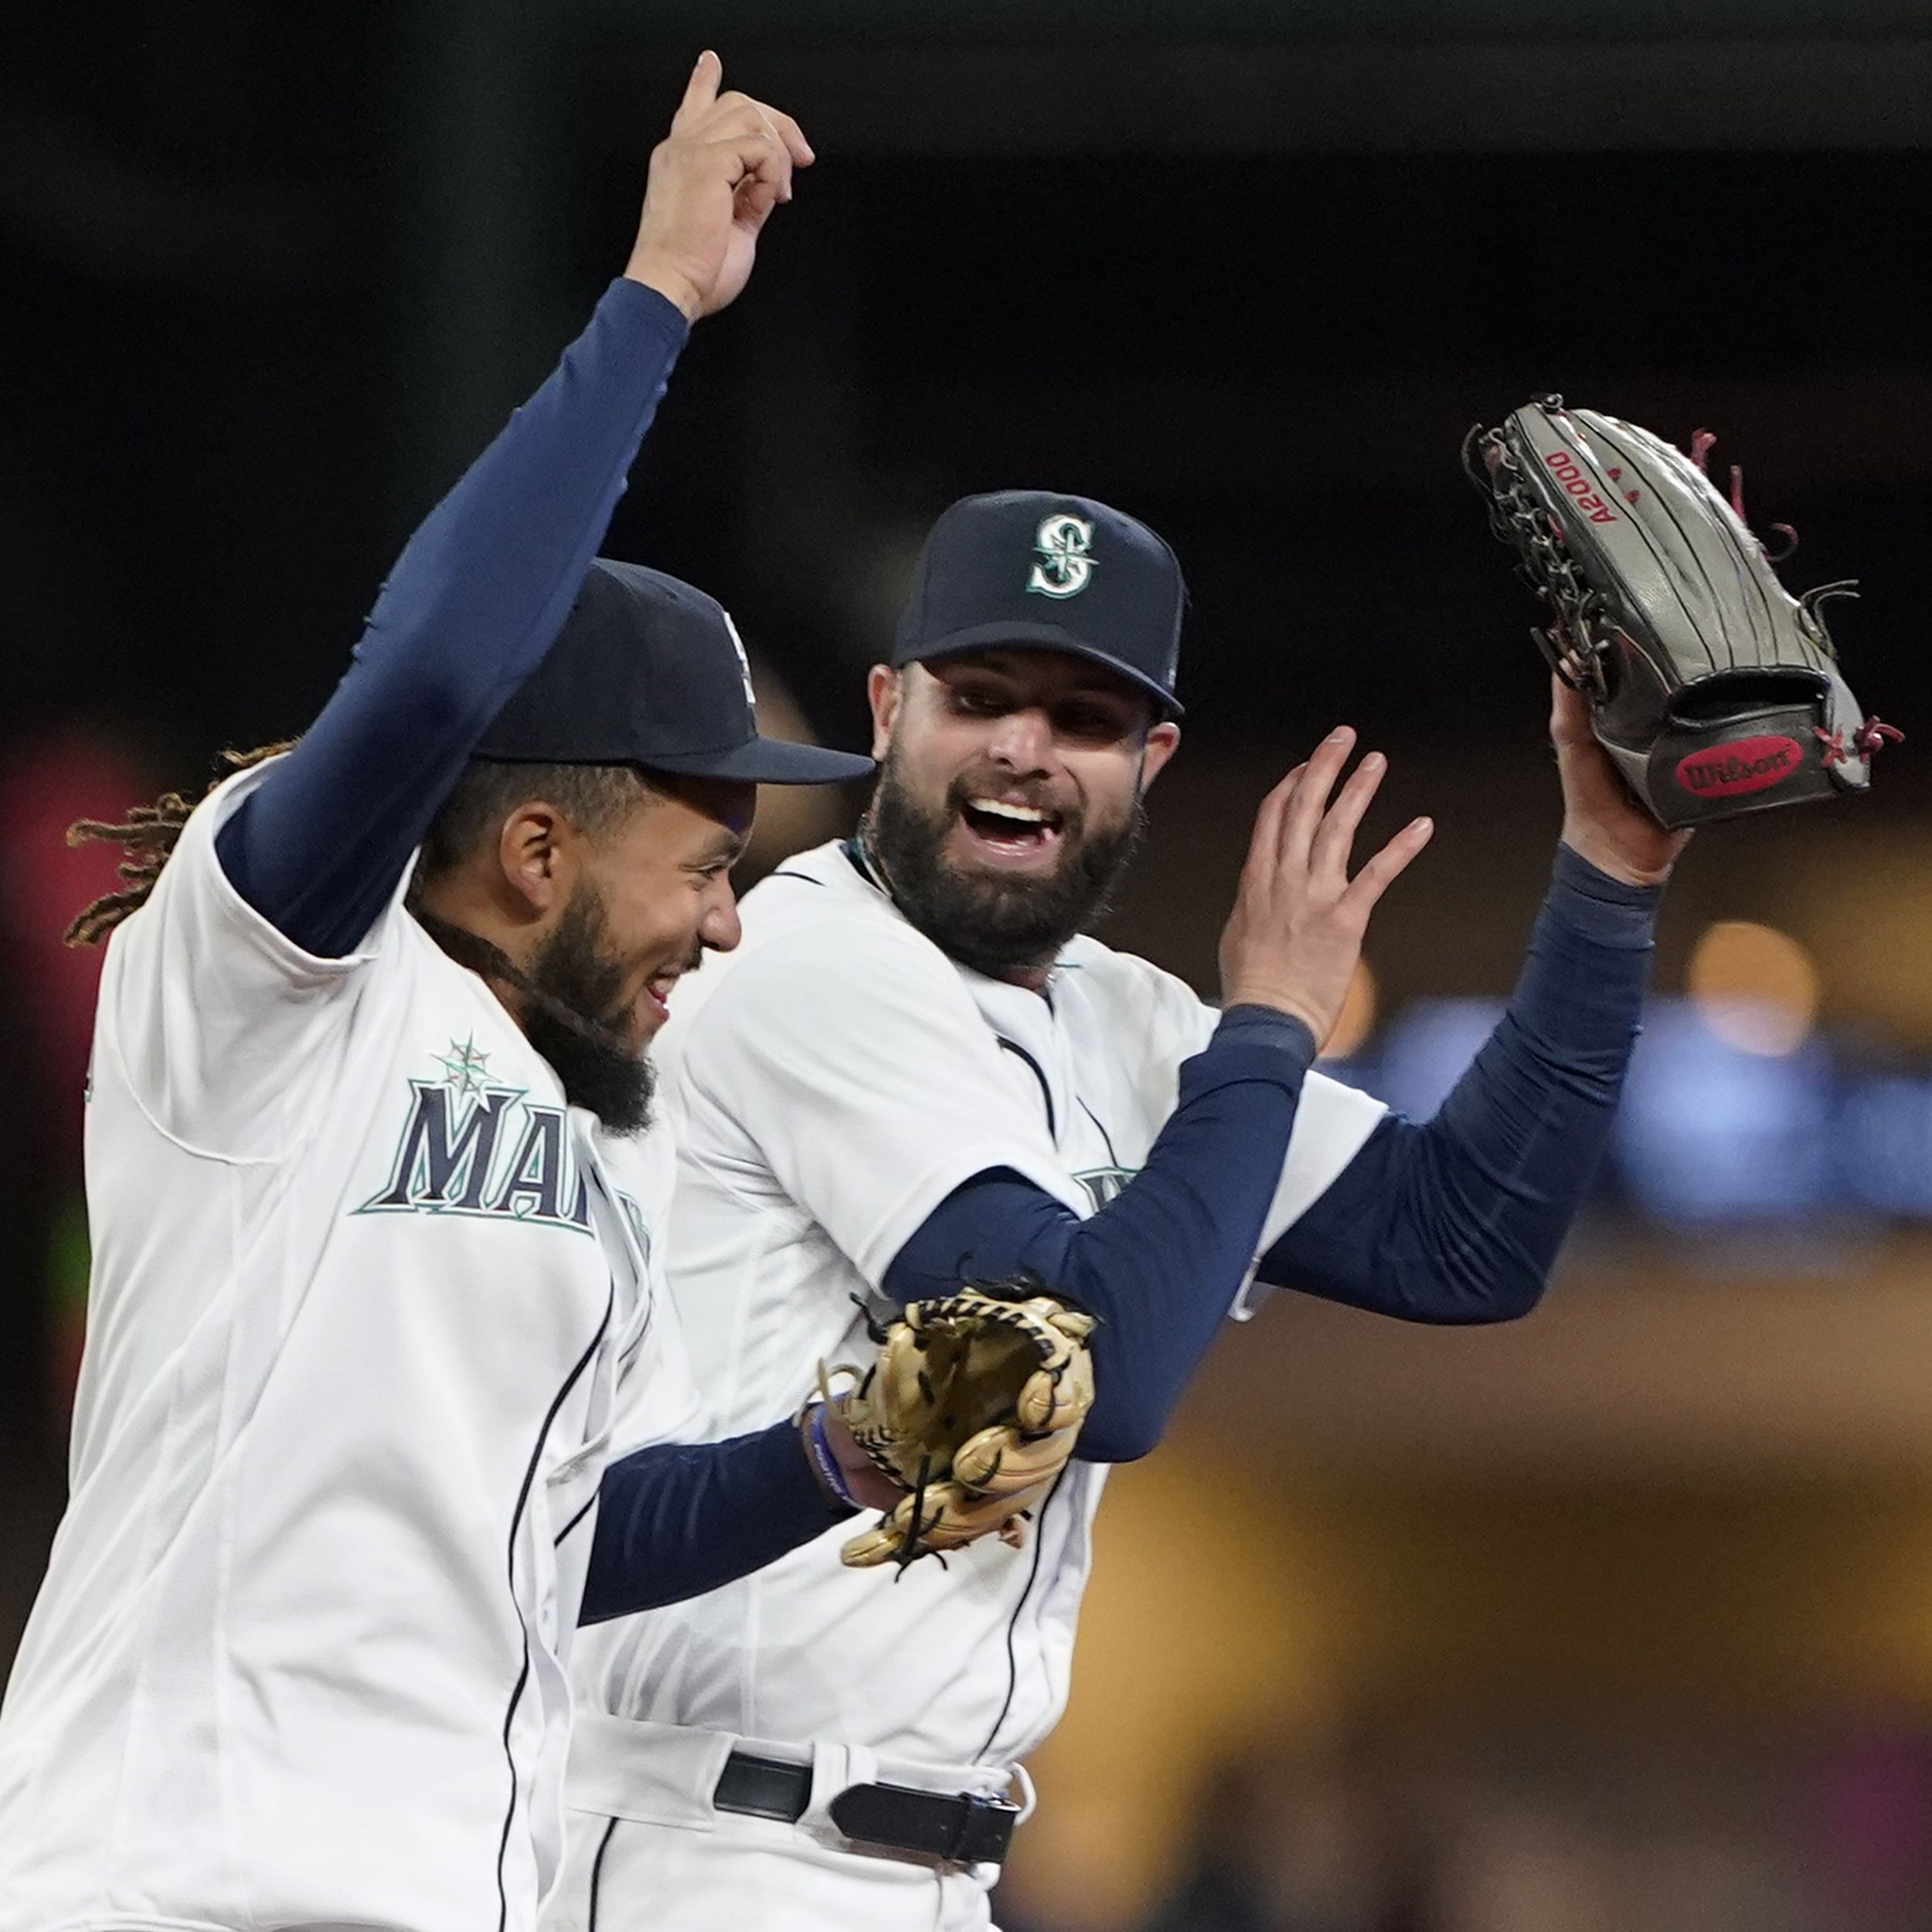 Mariners rebound from first-inning triple play to beat the Rangers